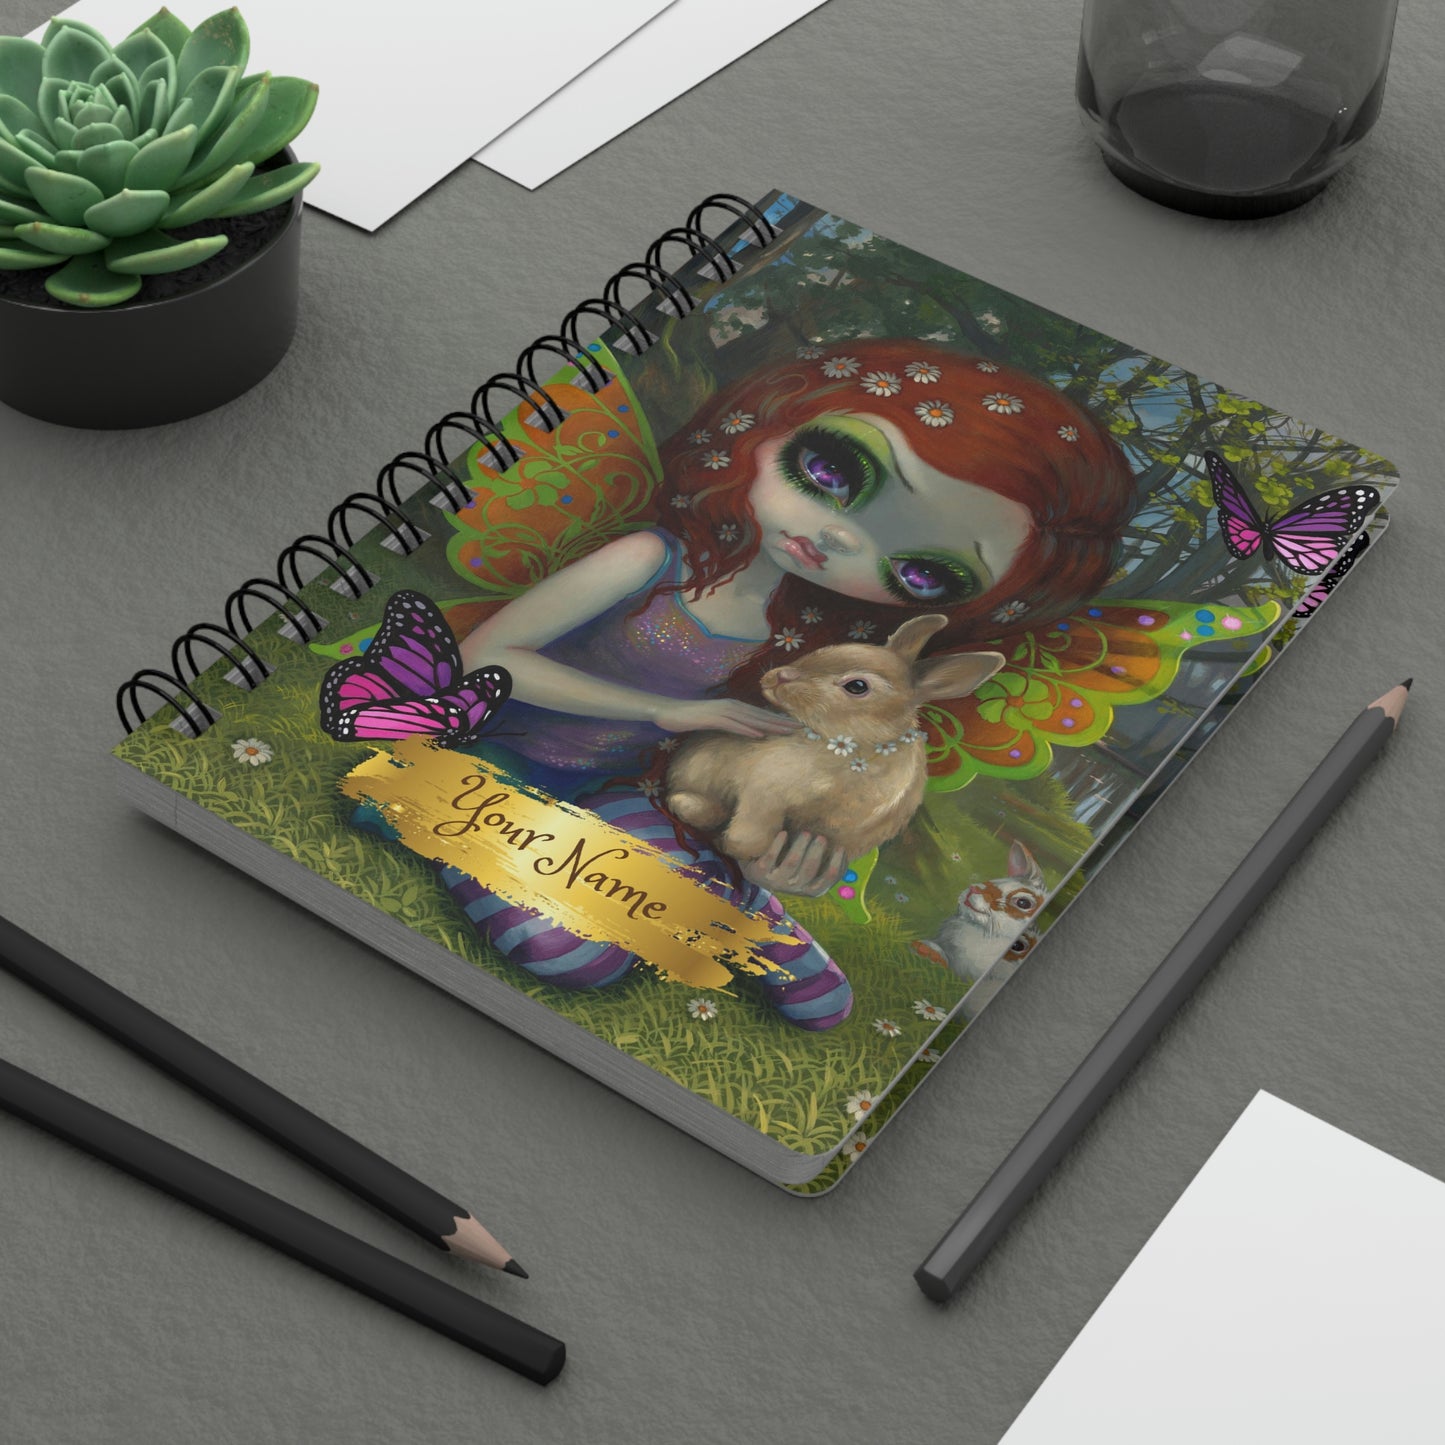 Butterfly Fairy Spiral Bound Journal 5x7 Rule Lined Journal : Faerie Notebook | Fairy Notebook | Butterfly Journal | Fairy Core Journal | Green Witch